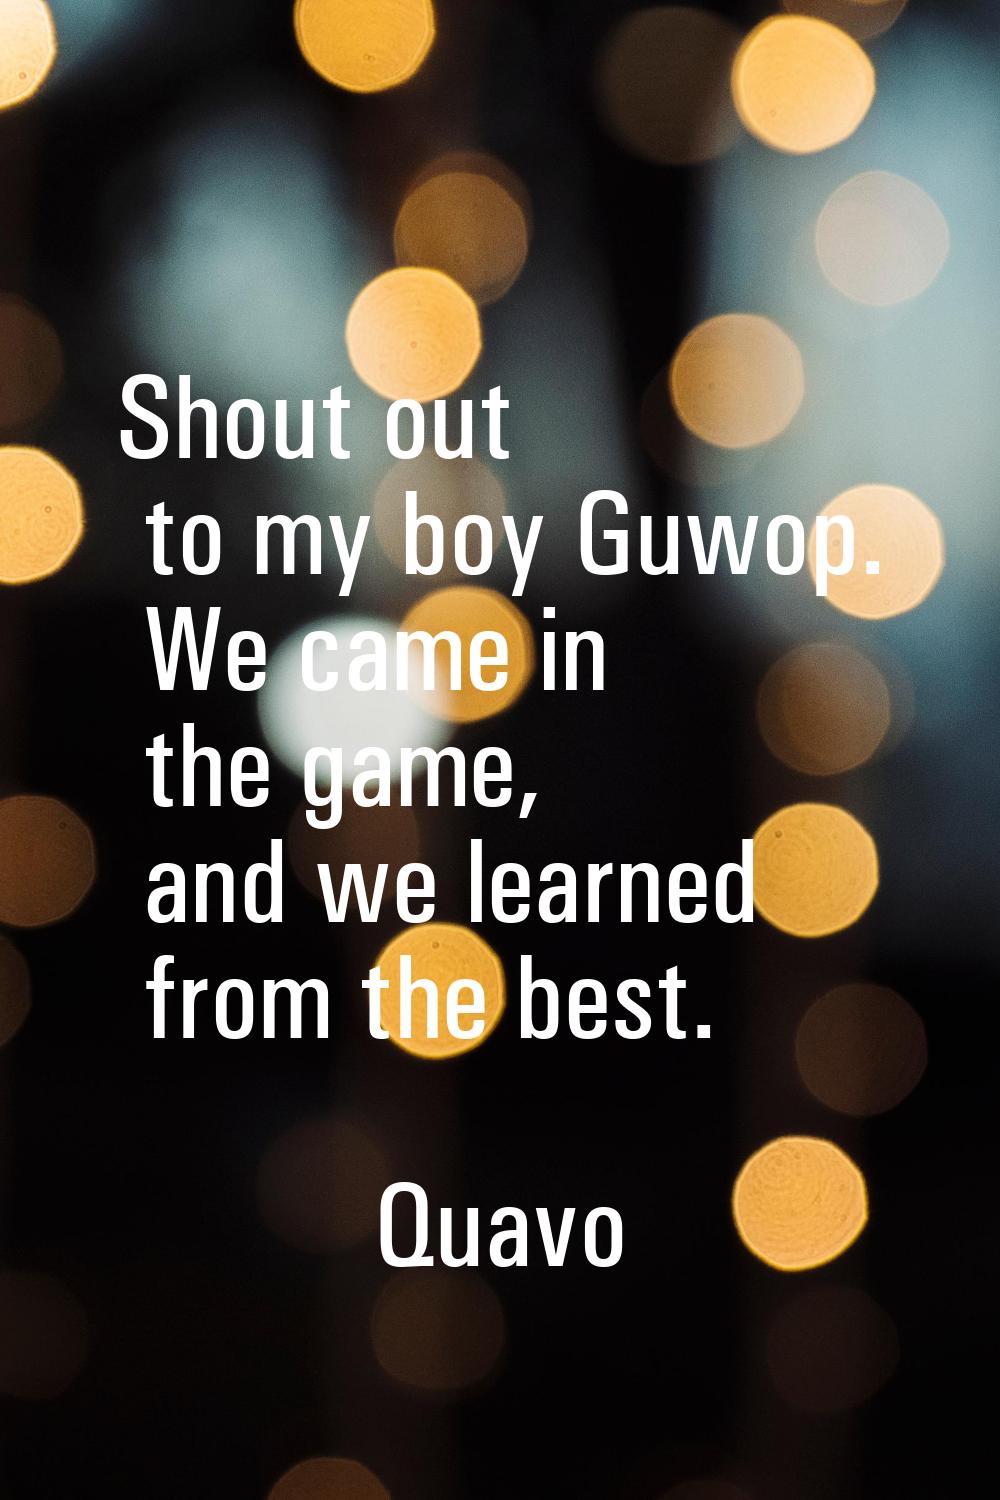 Shout out to my boy Guwop. We came in the game, and we learned from the best.